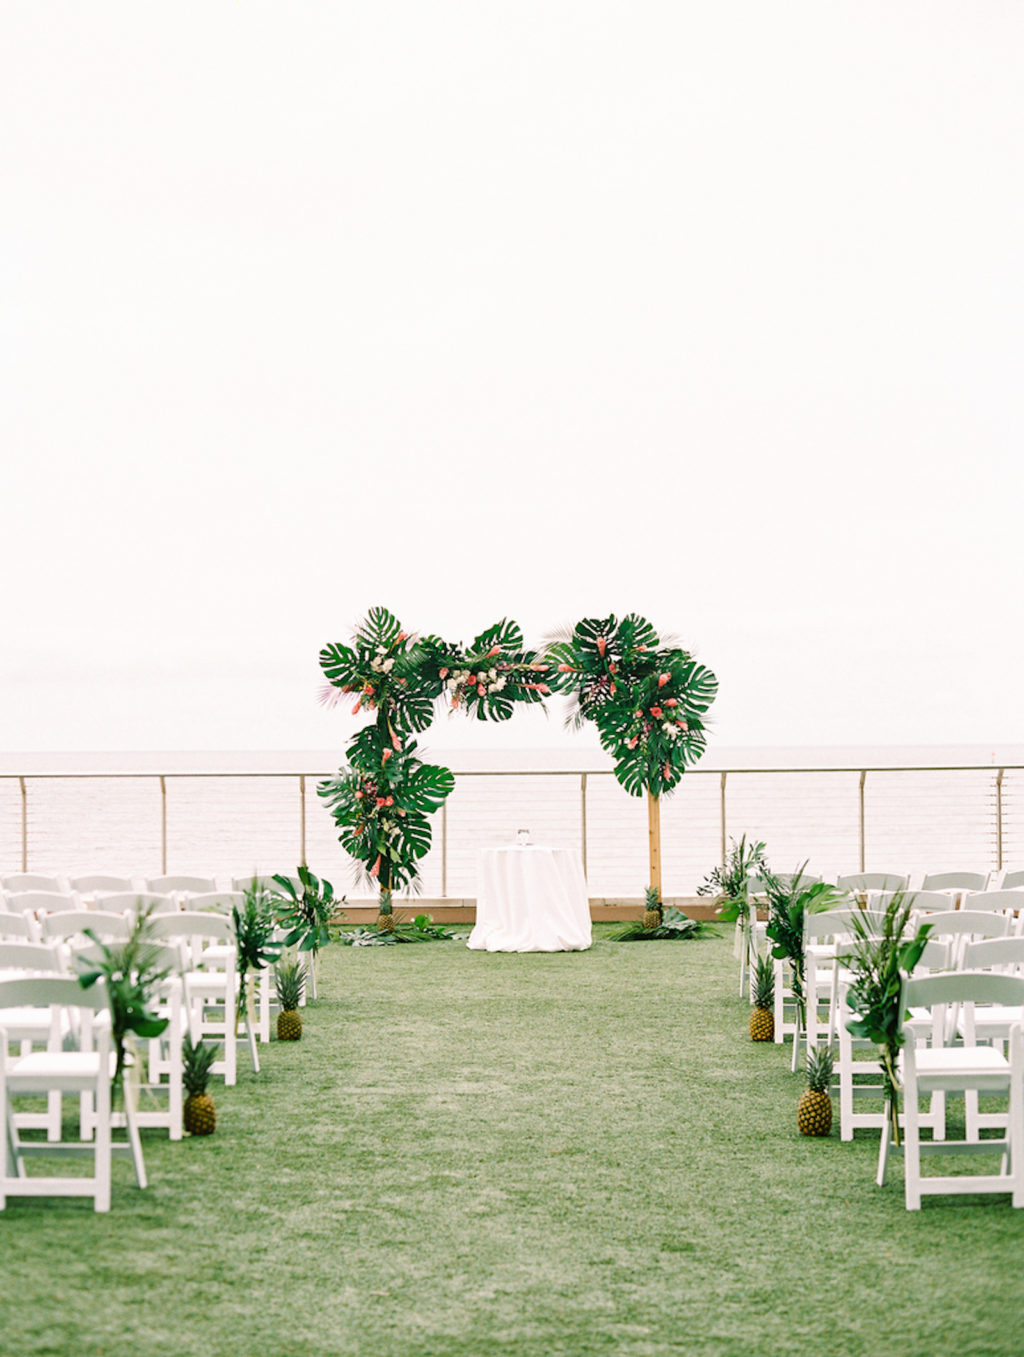 Tropical Elegant Waterfront Wedding Ceremony Decor, Arch with Palm Tree Leaves and Flowers | Tampa Bay Wedding Planner Special Moments Event Planning | Clearwater Beach Wedding Venue Opal Sands Resort